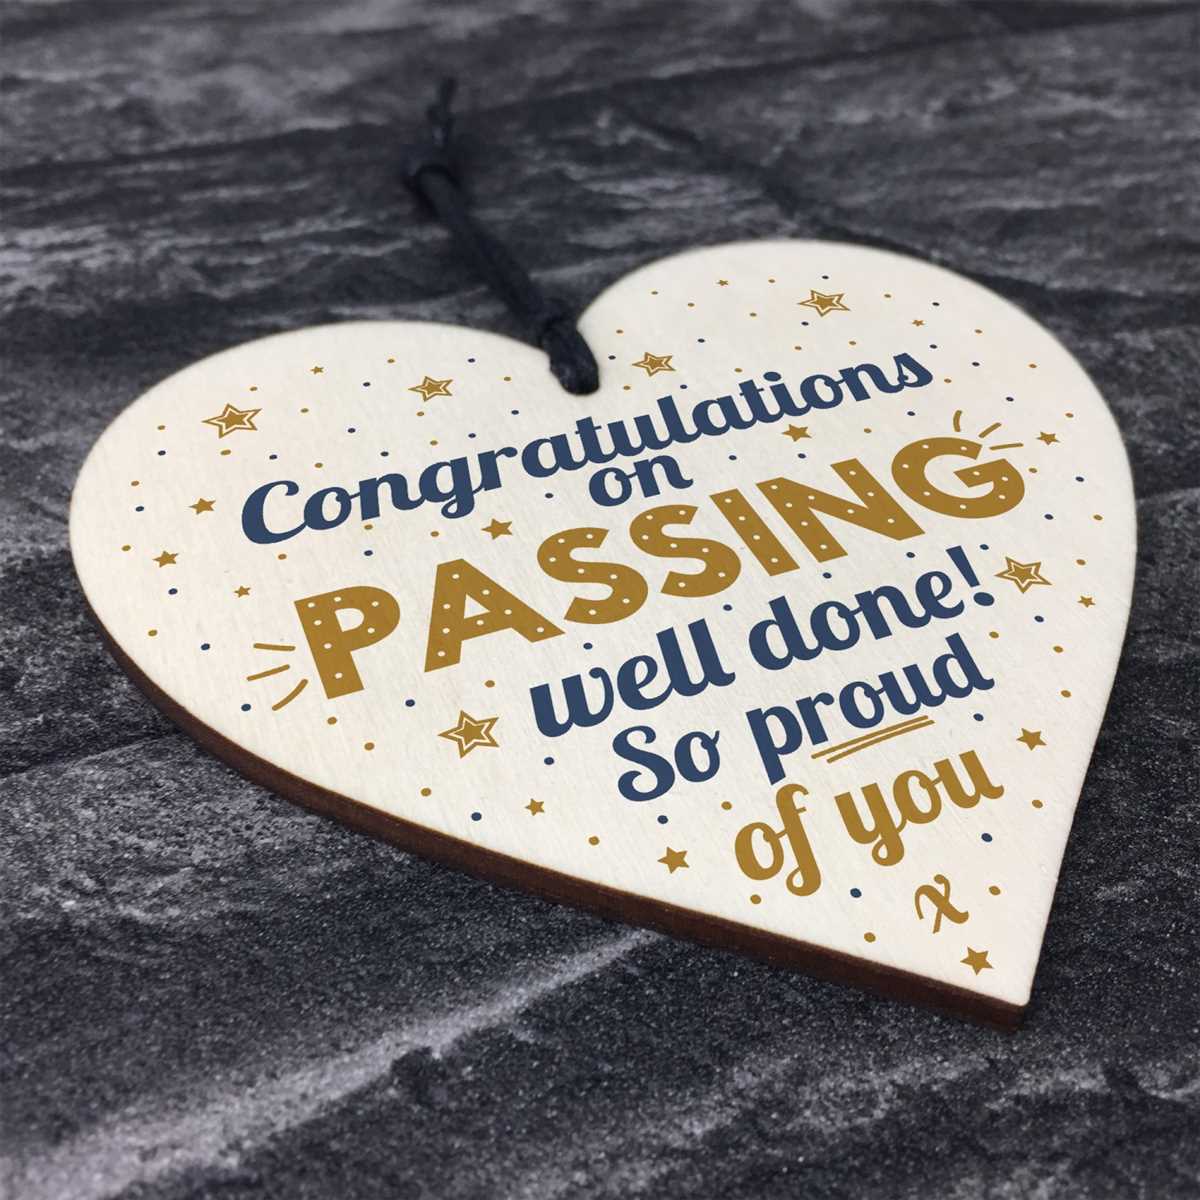 Congratulation Messages for Passing Exams